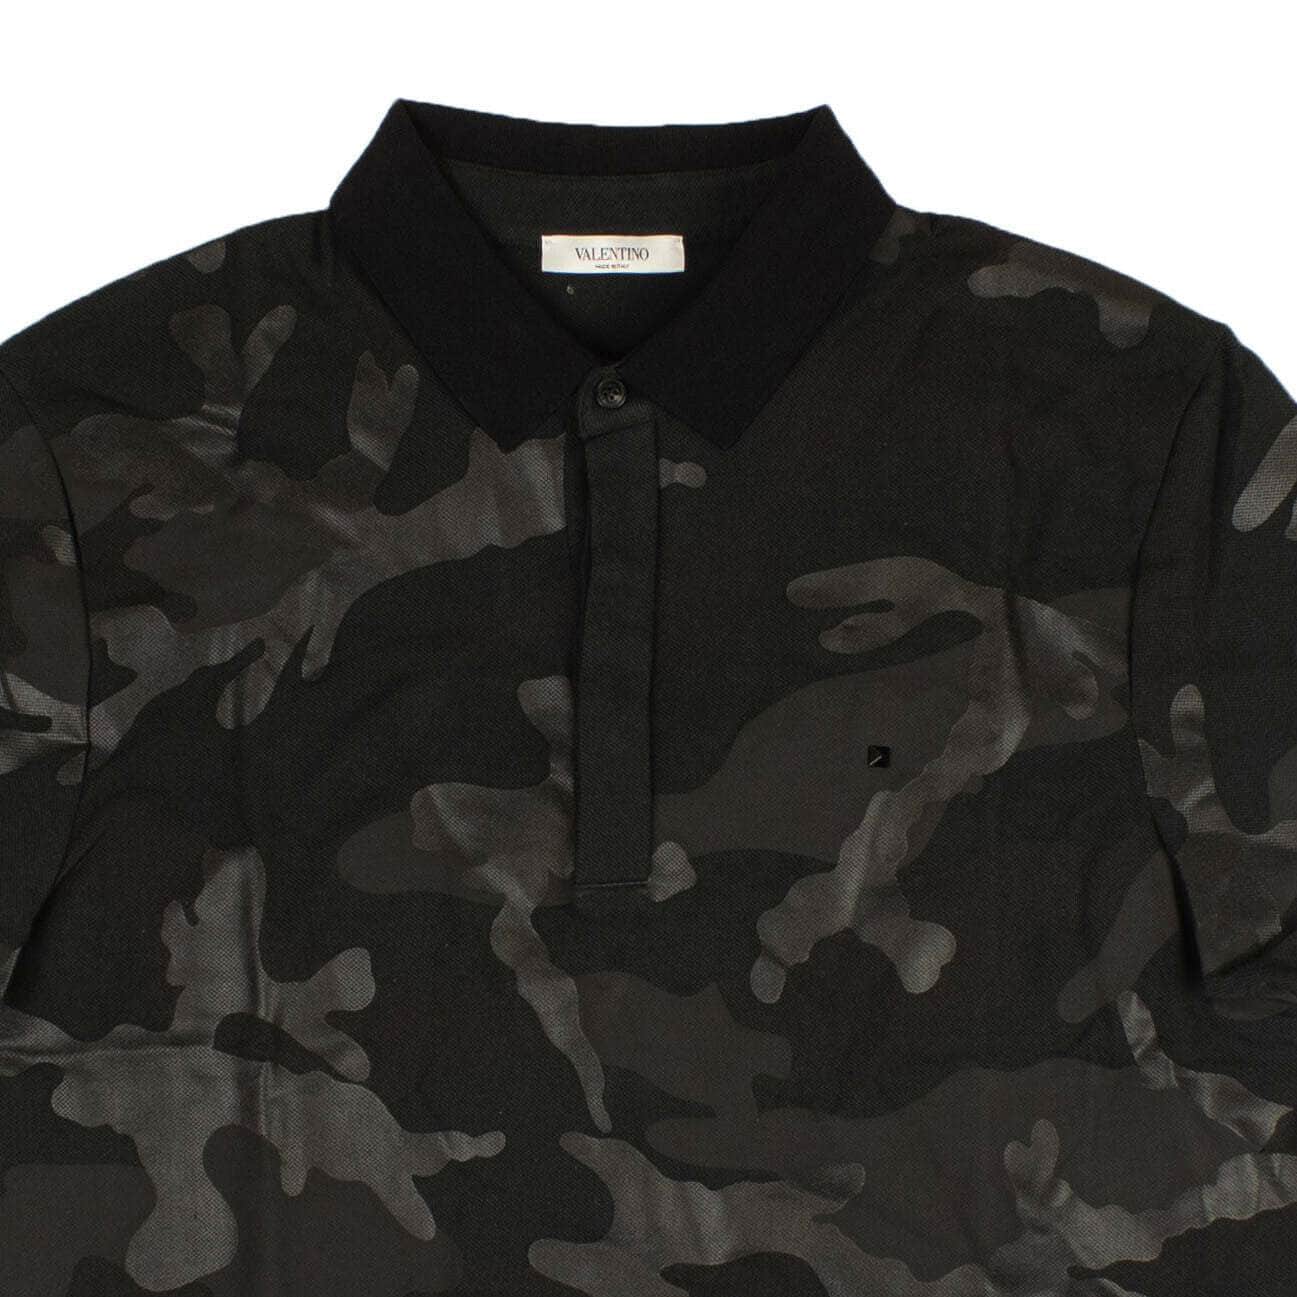 Valentino 250-500, channelenable-all, chicmi, couponcollection, gender-mens, main-clothing, mens-polo-shirts, mens-shoes, size-s, valentino S Black Camo Polo Short Sleeve Shirt 95-VLT-1029/S 95-VLT-1029/S